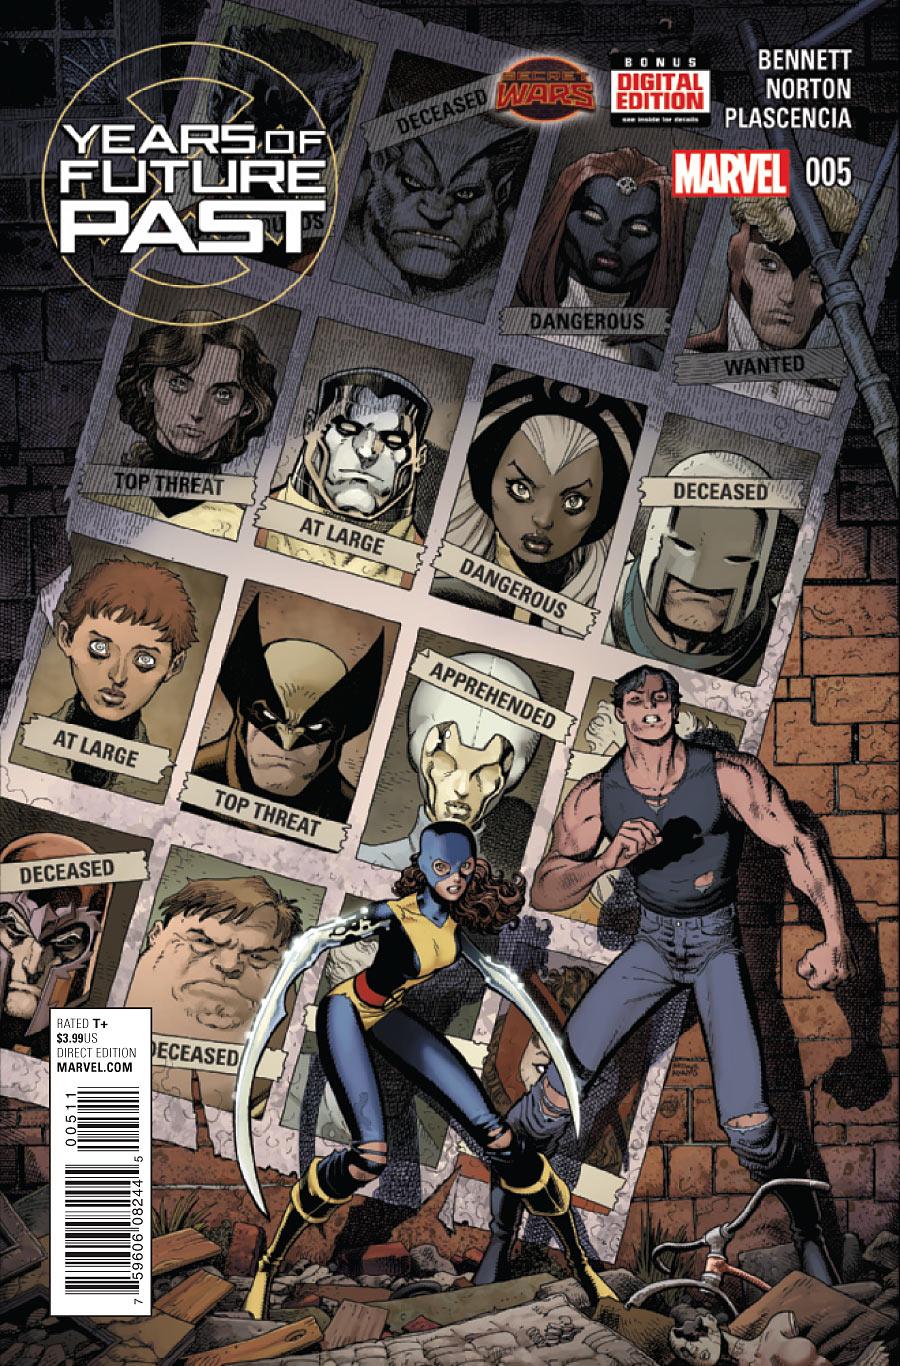 Years of Future Past Vol. 1 #5